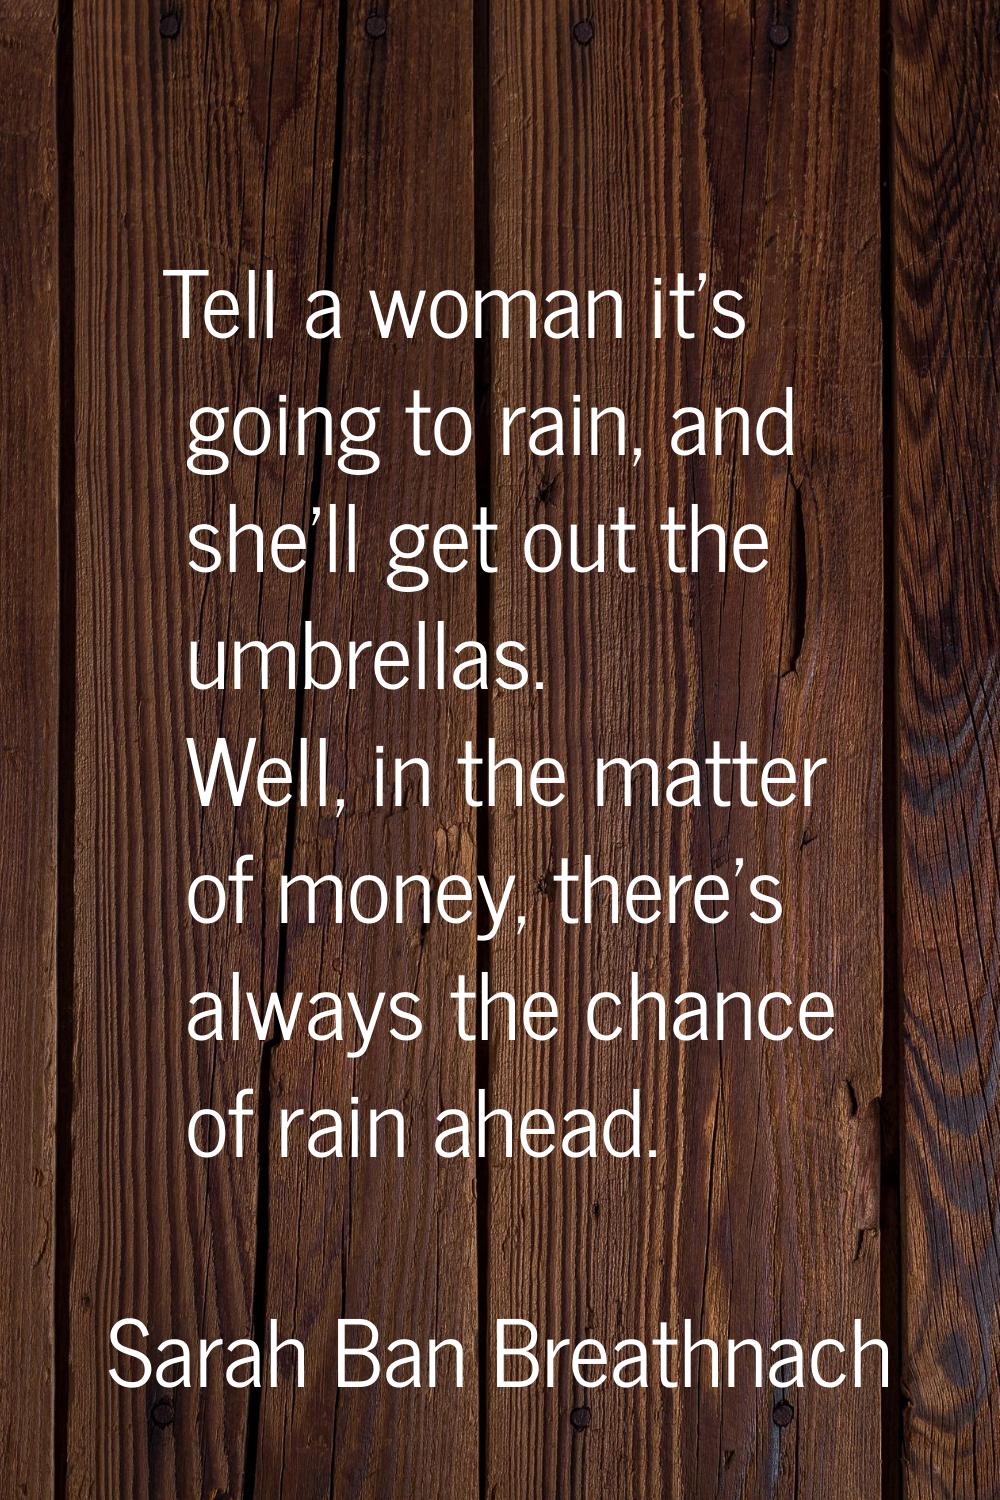 Tell a woman it's going to rain, and she'll get out the umbrellas. Well, in the matter of money, th